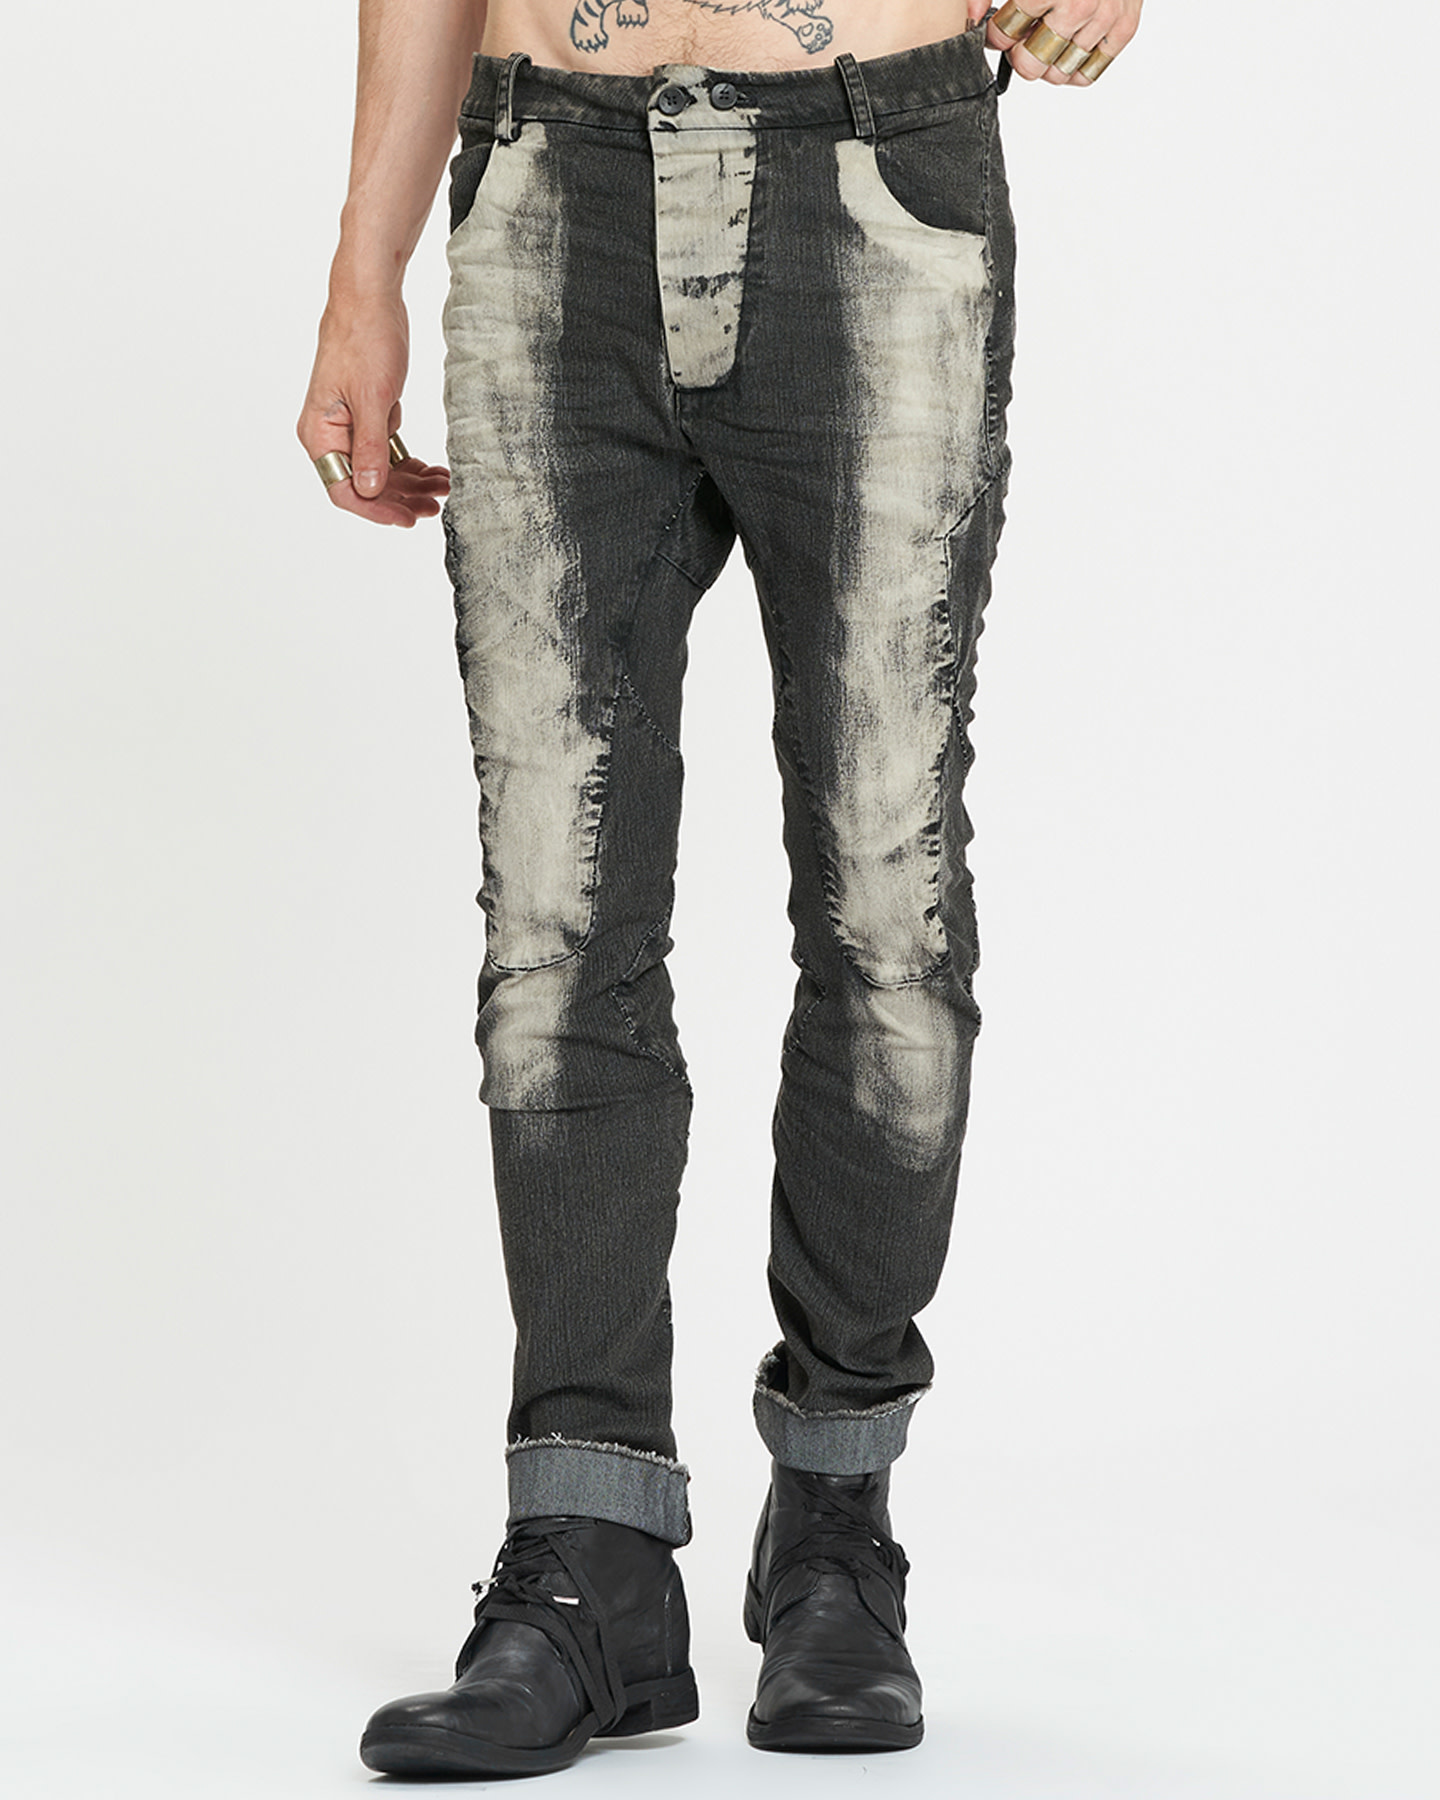 Corroded Slim Motor Bike Jeans by Masnada | Shop Untitled NYC - Shop  Untitled NYC